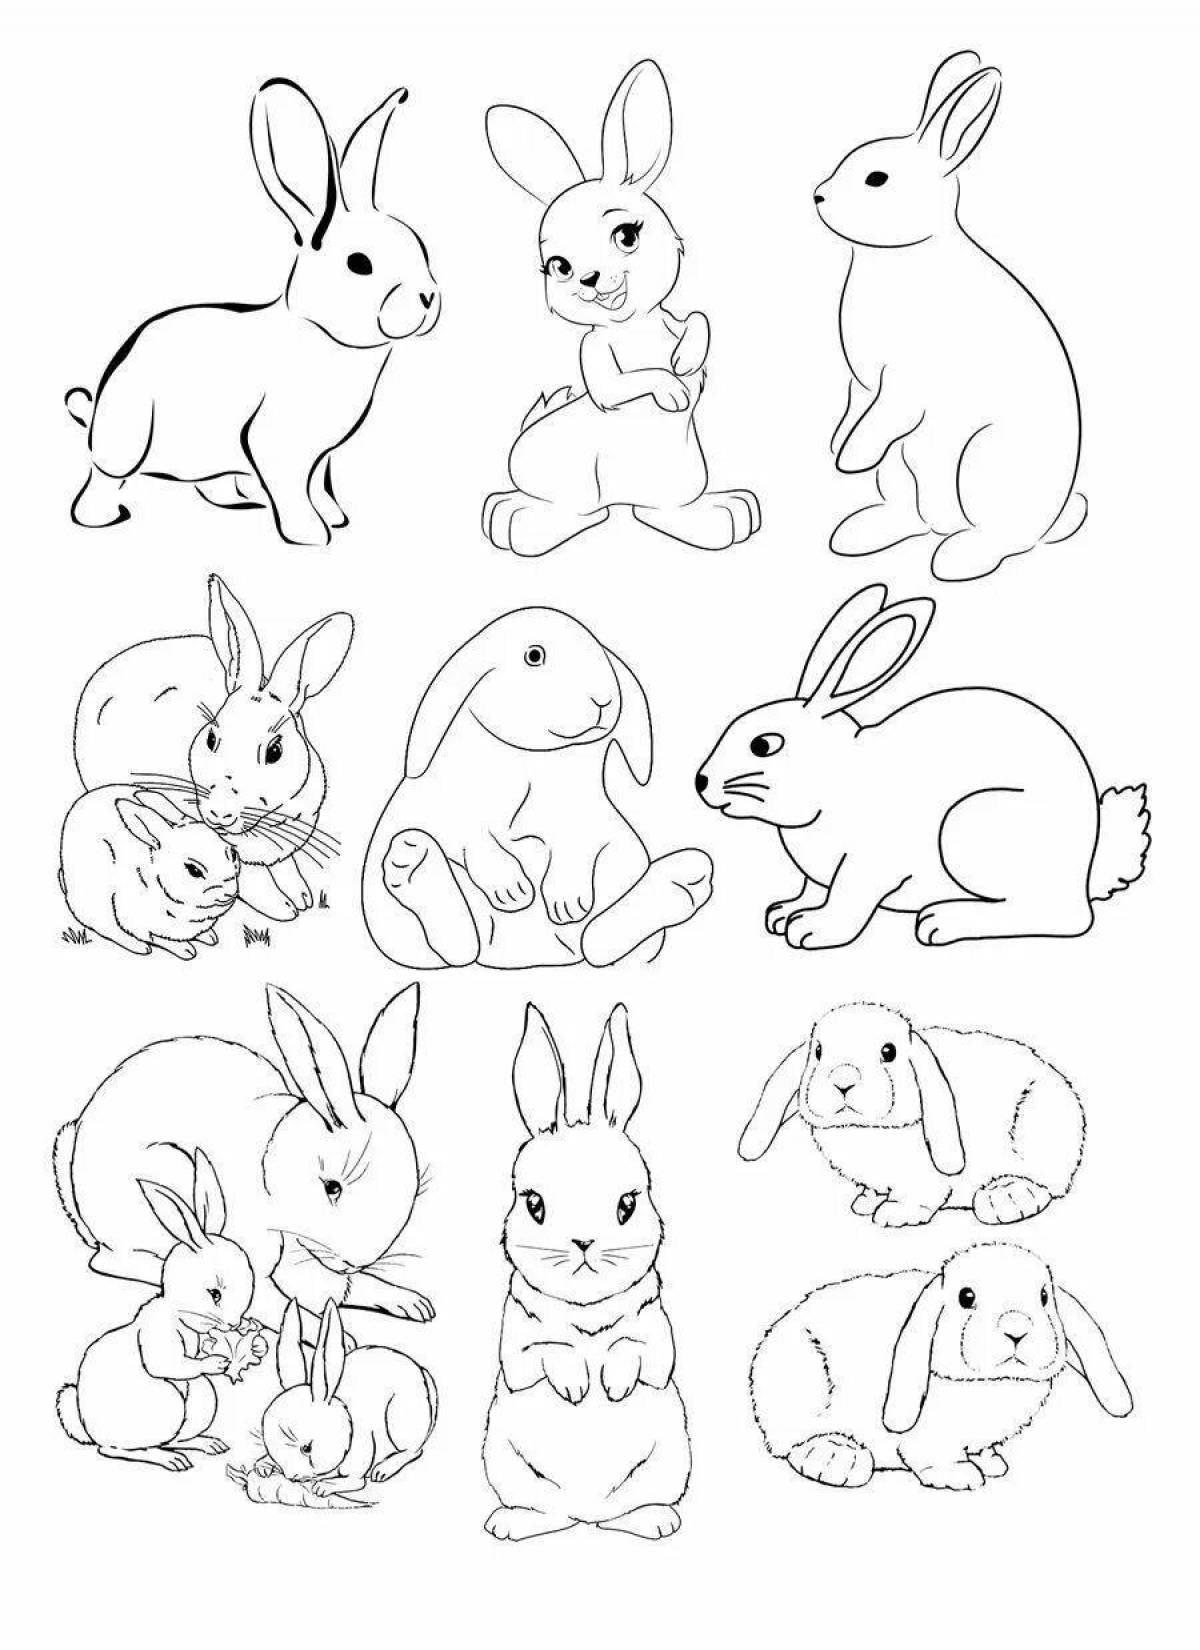 Adorable little rabbits coloring book